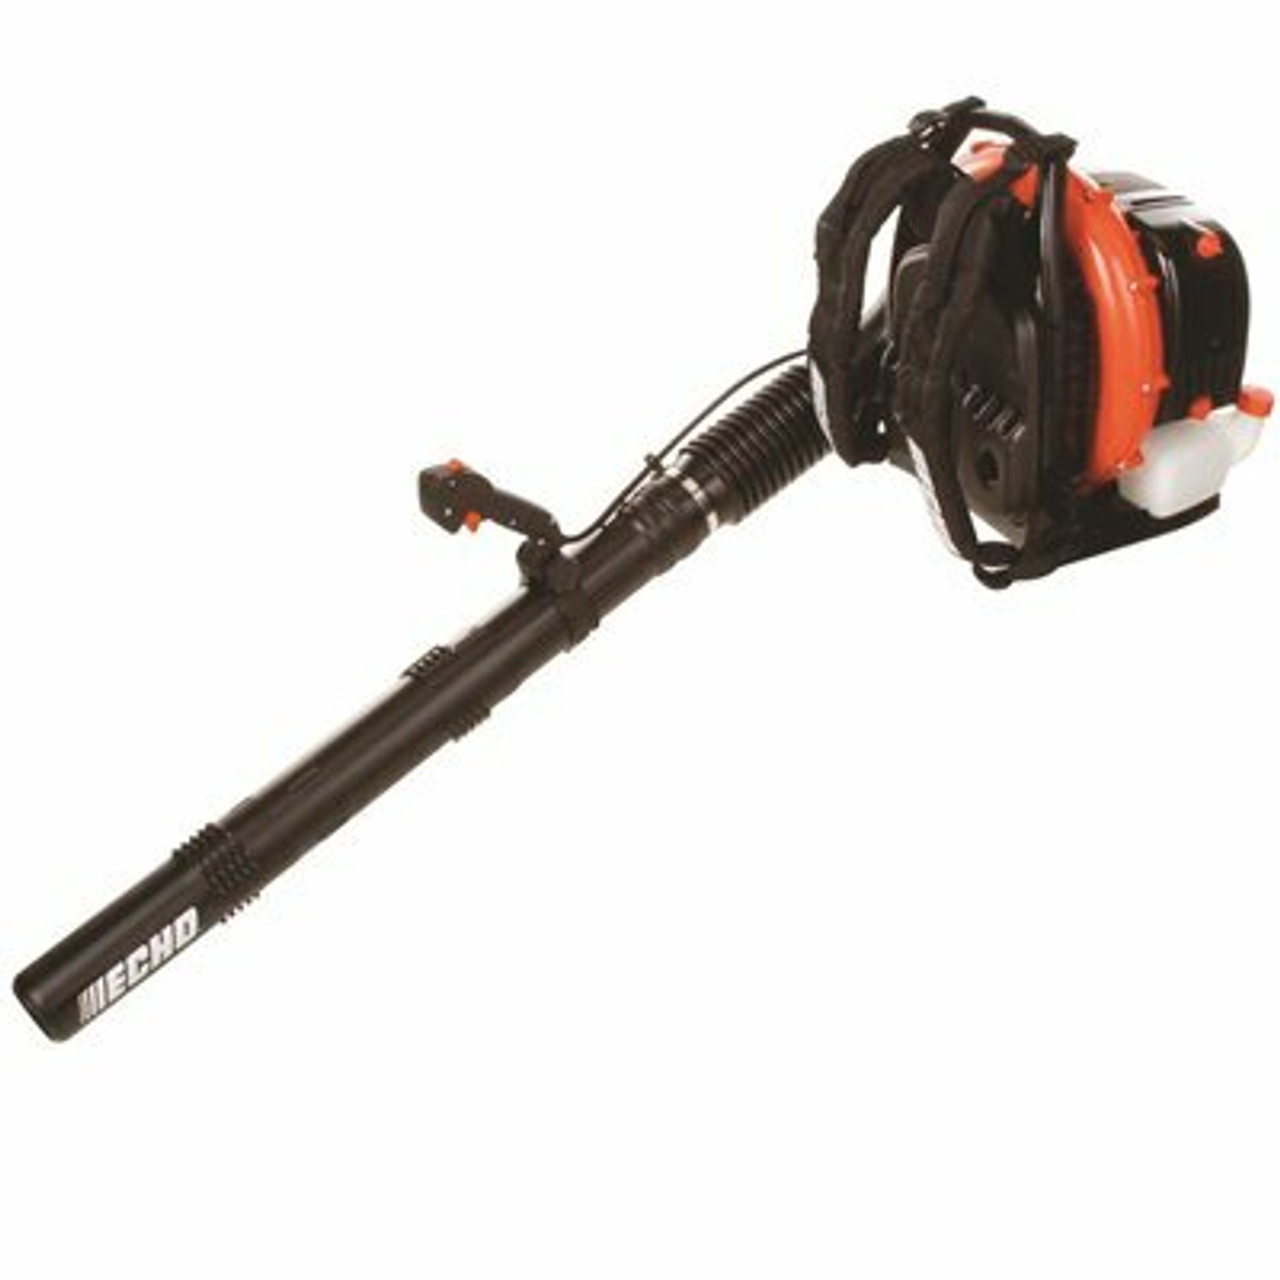 Echo 234 Mph 756 Cfm 63.3Cc Gas 2-Stroke Cycle Backpack Leaf Blower With Tube Throttle